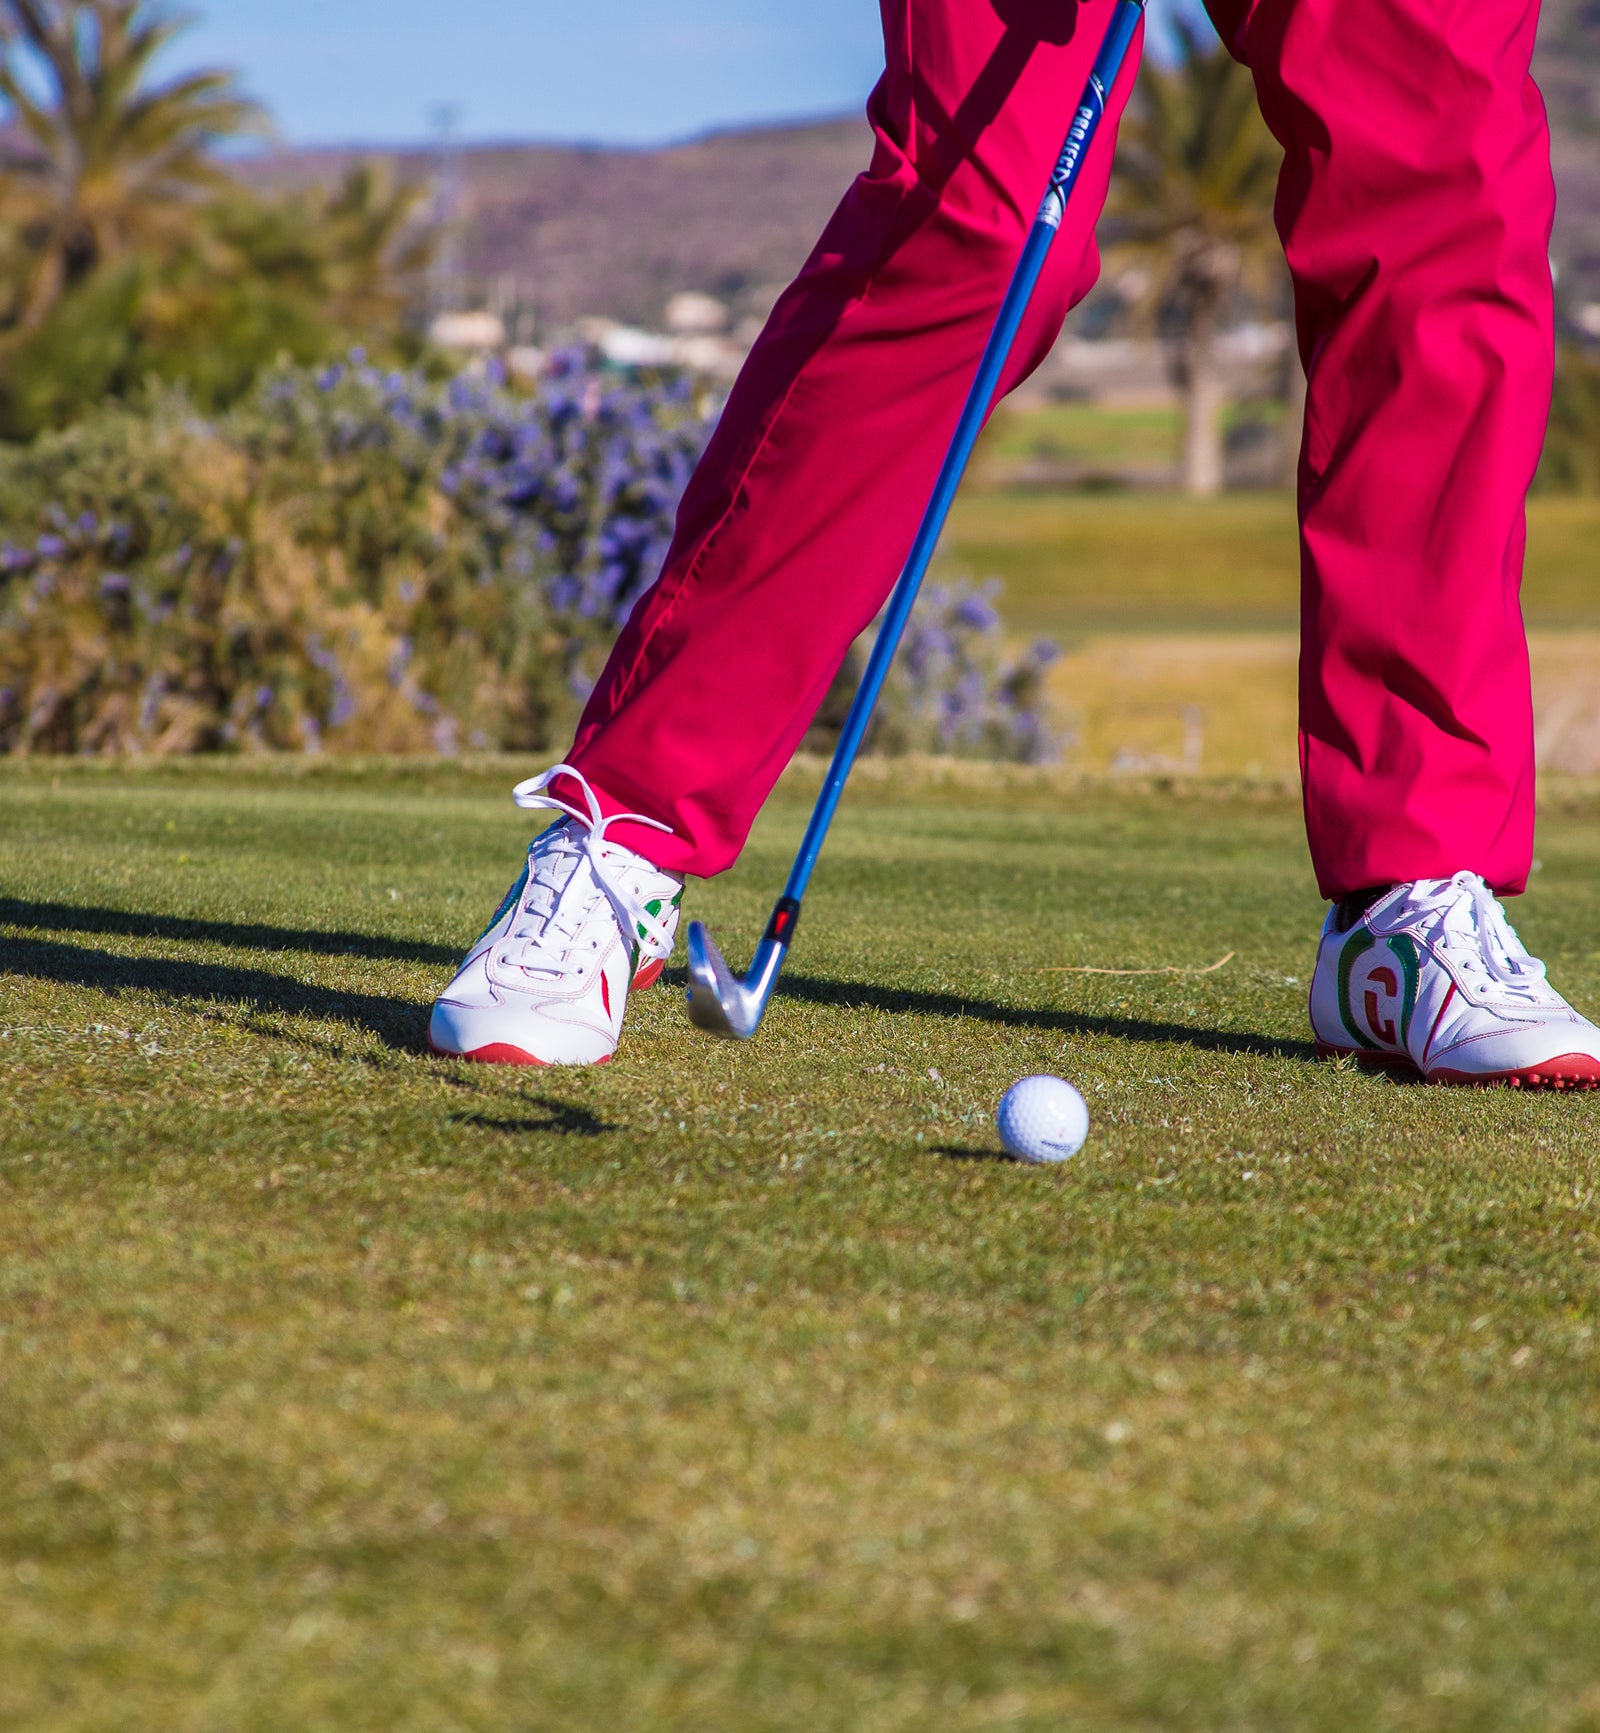 Essentials to Get Your Golf Club Swinging like a Pro